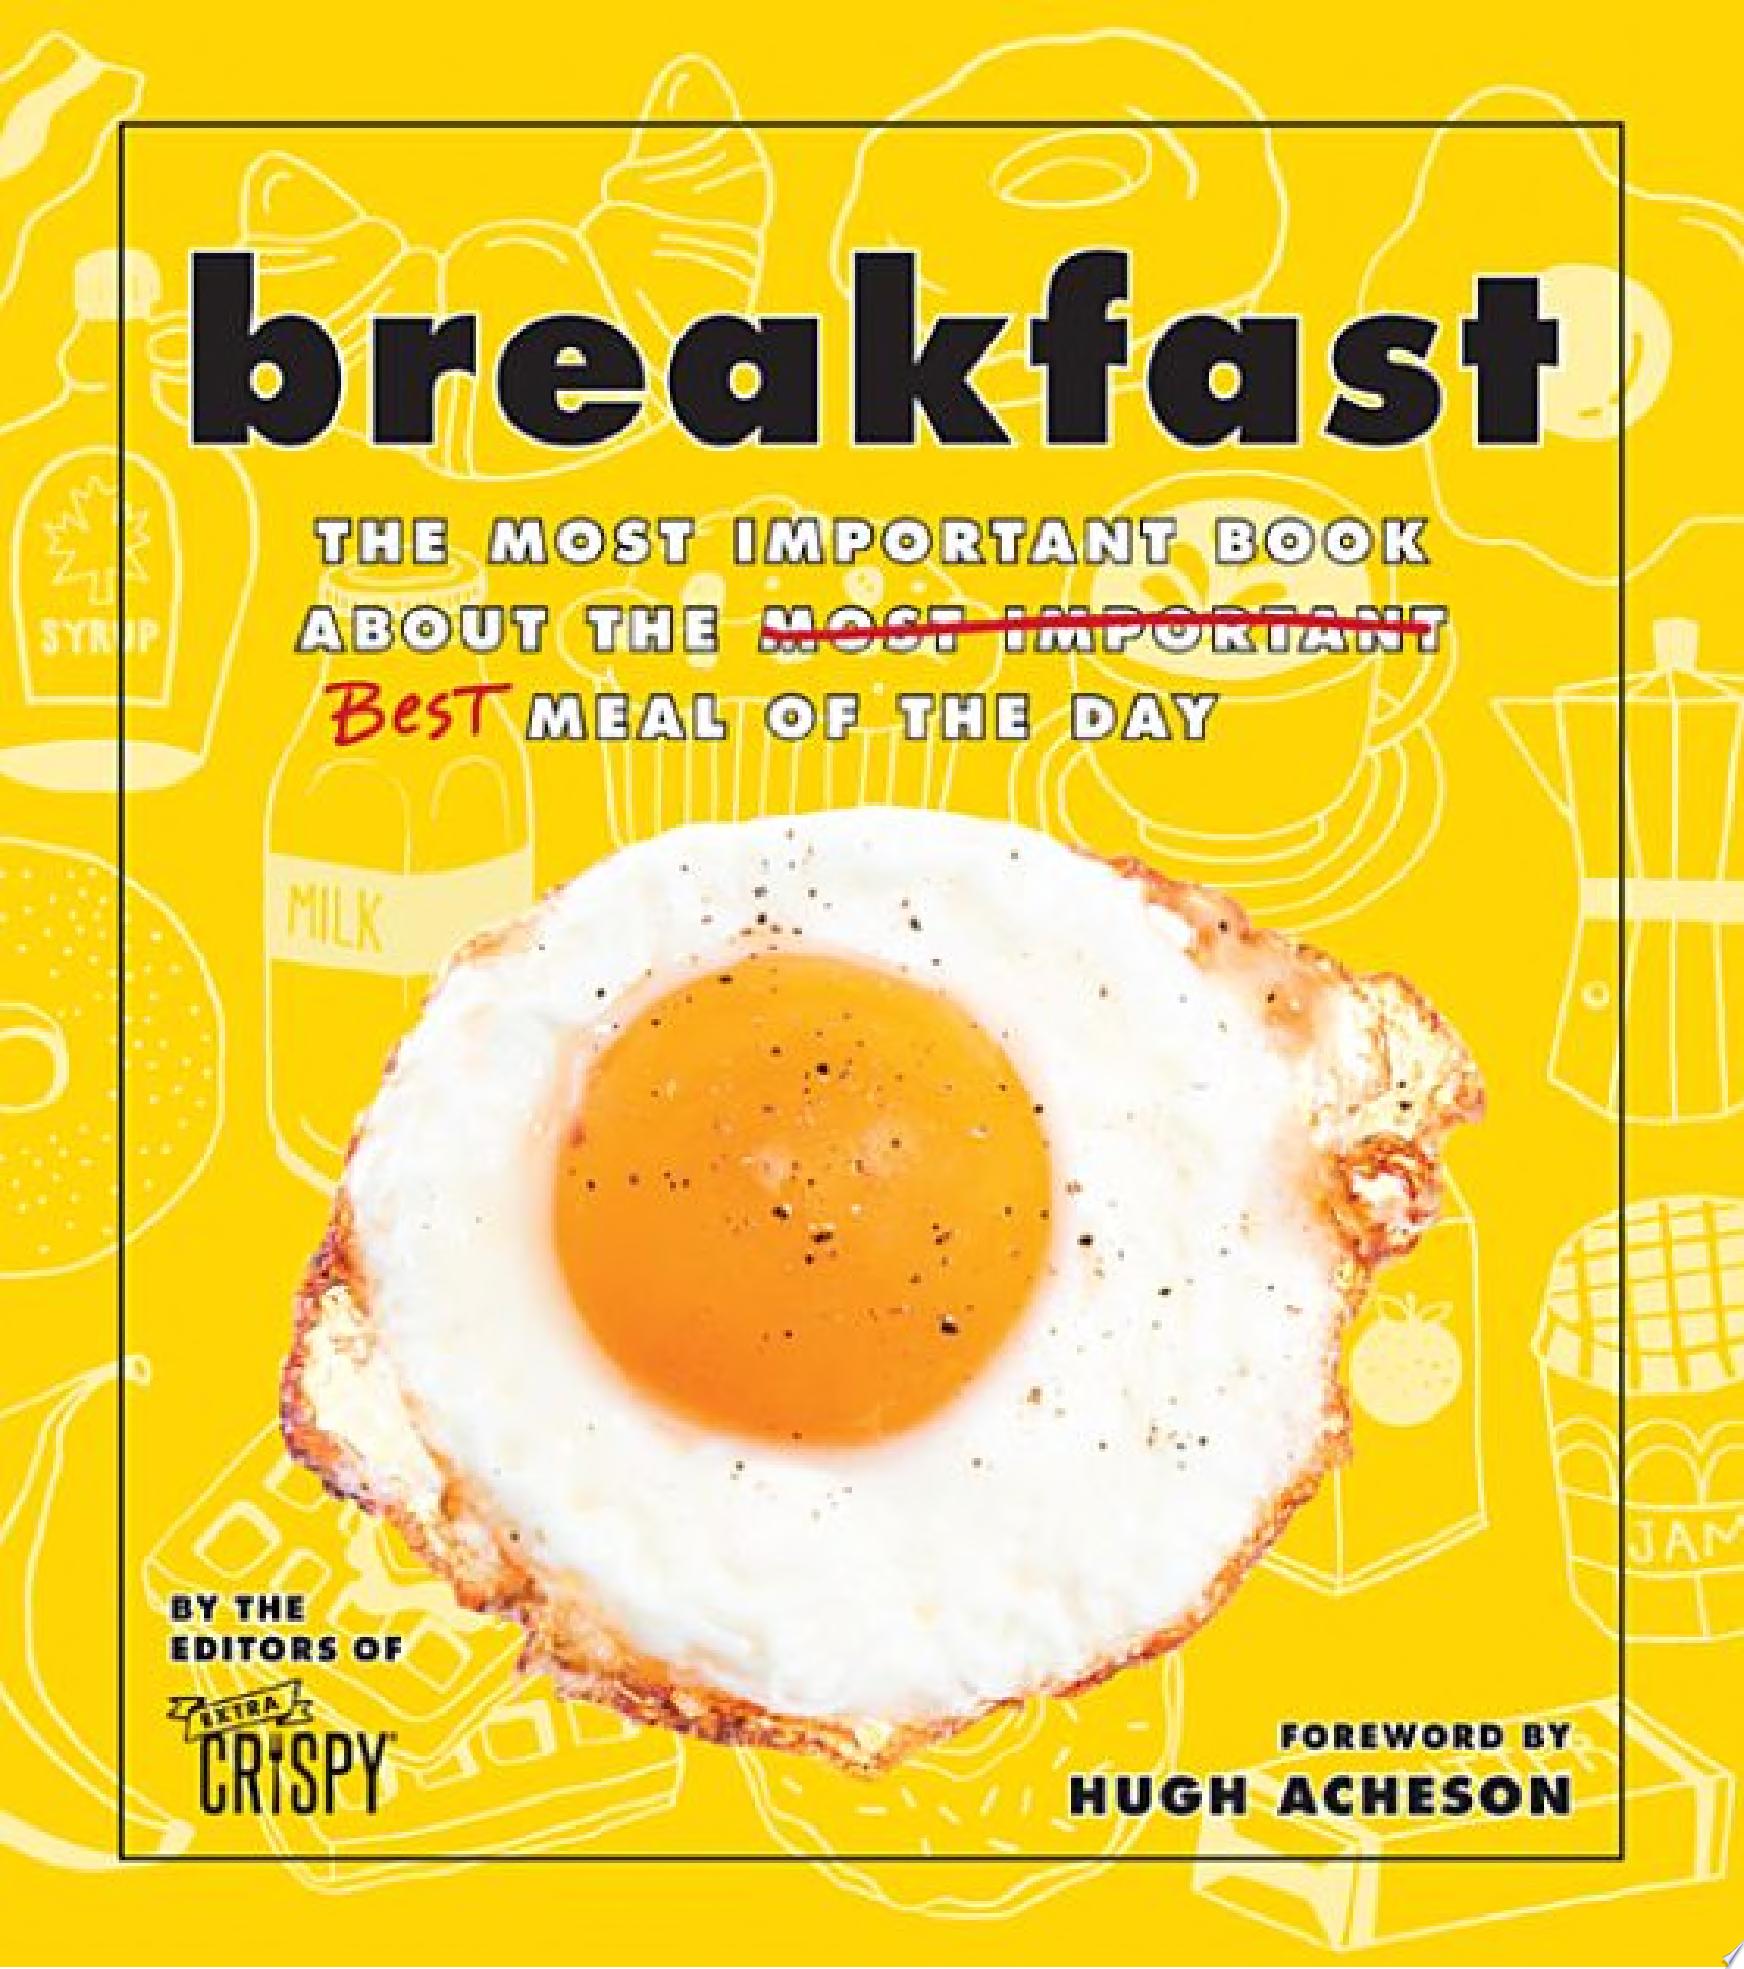 Image for "Breakfast: the Most Important Book about the Best Meal of the Day"